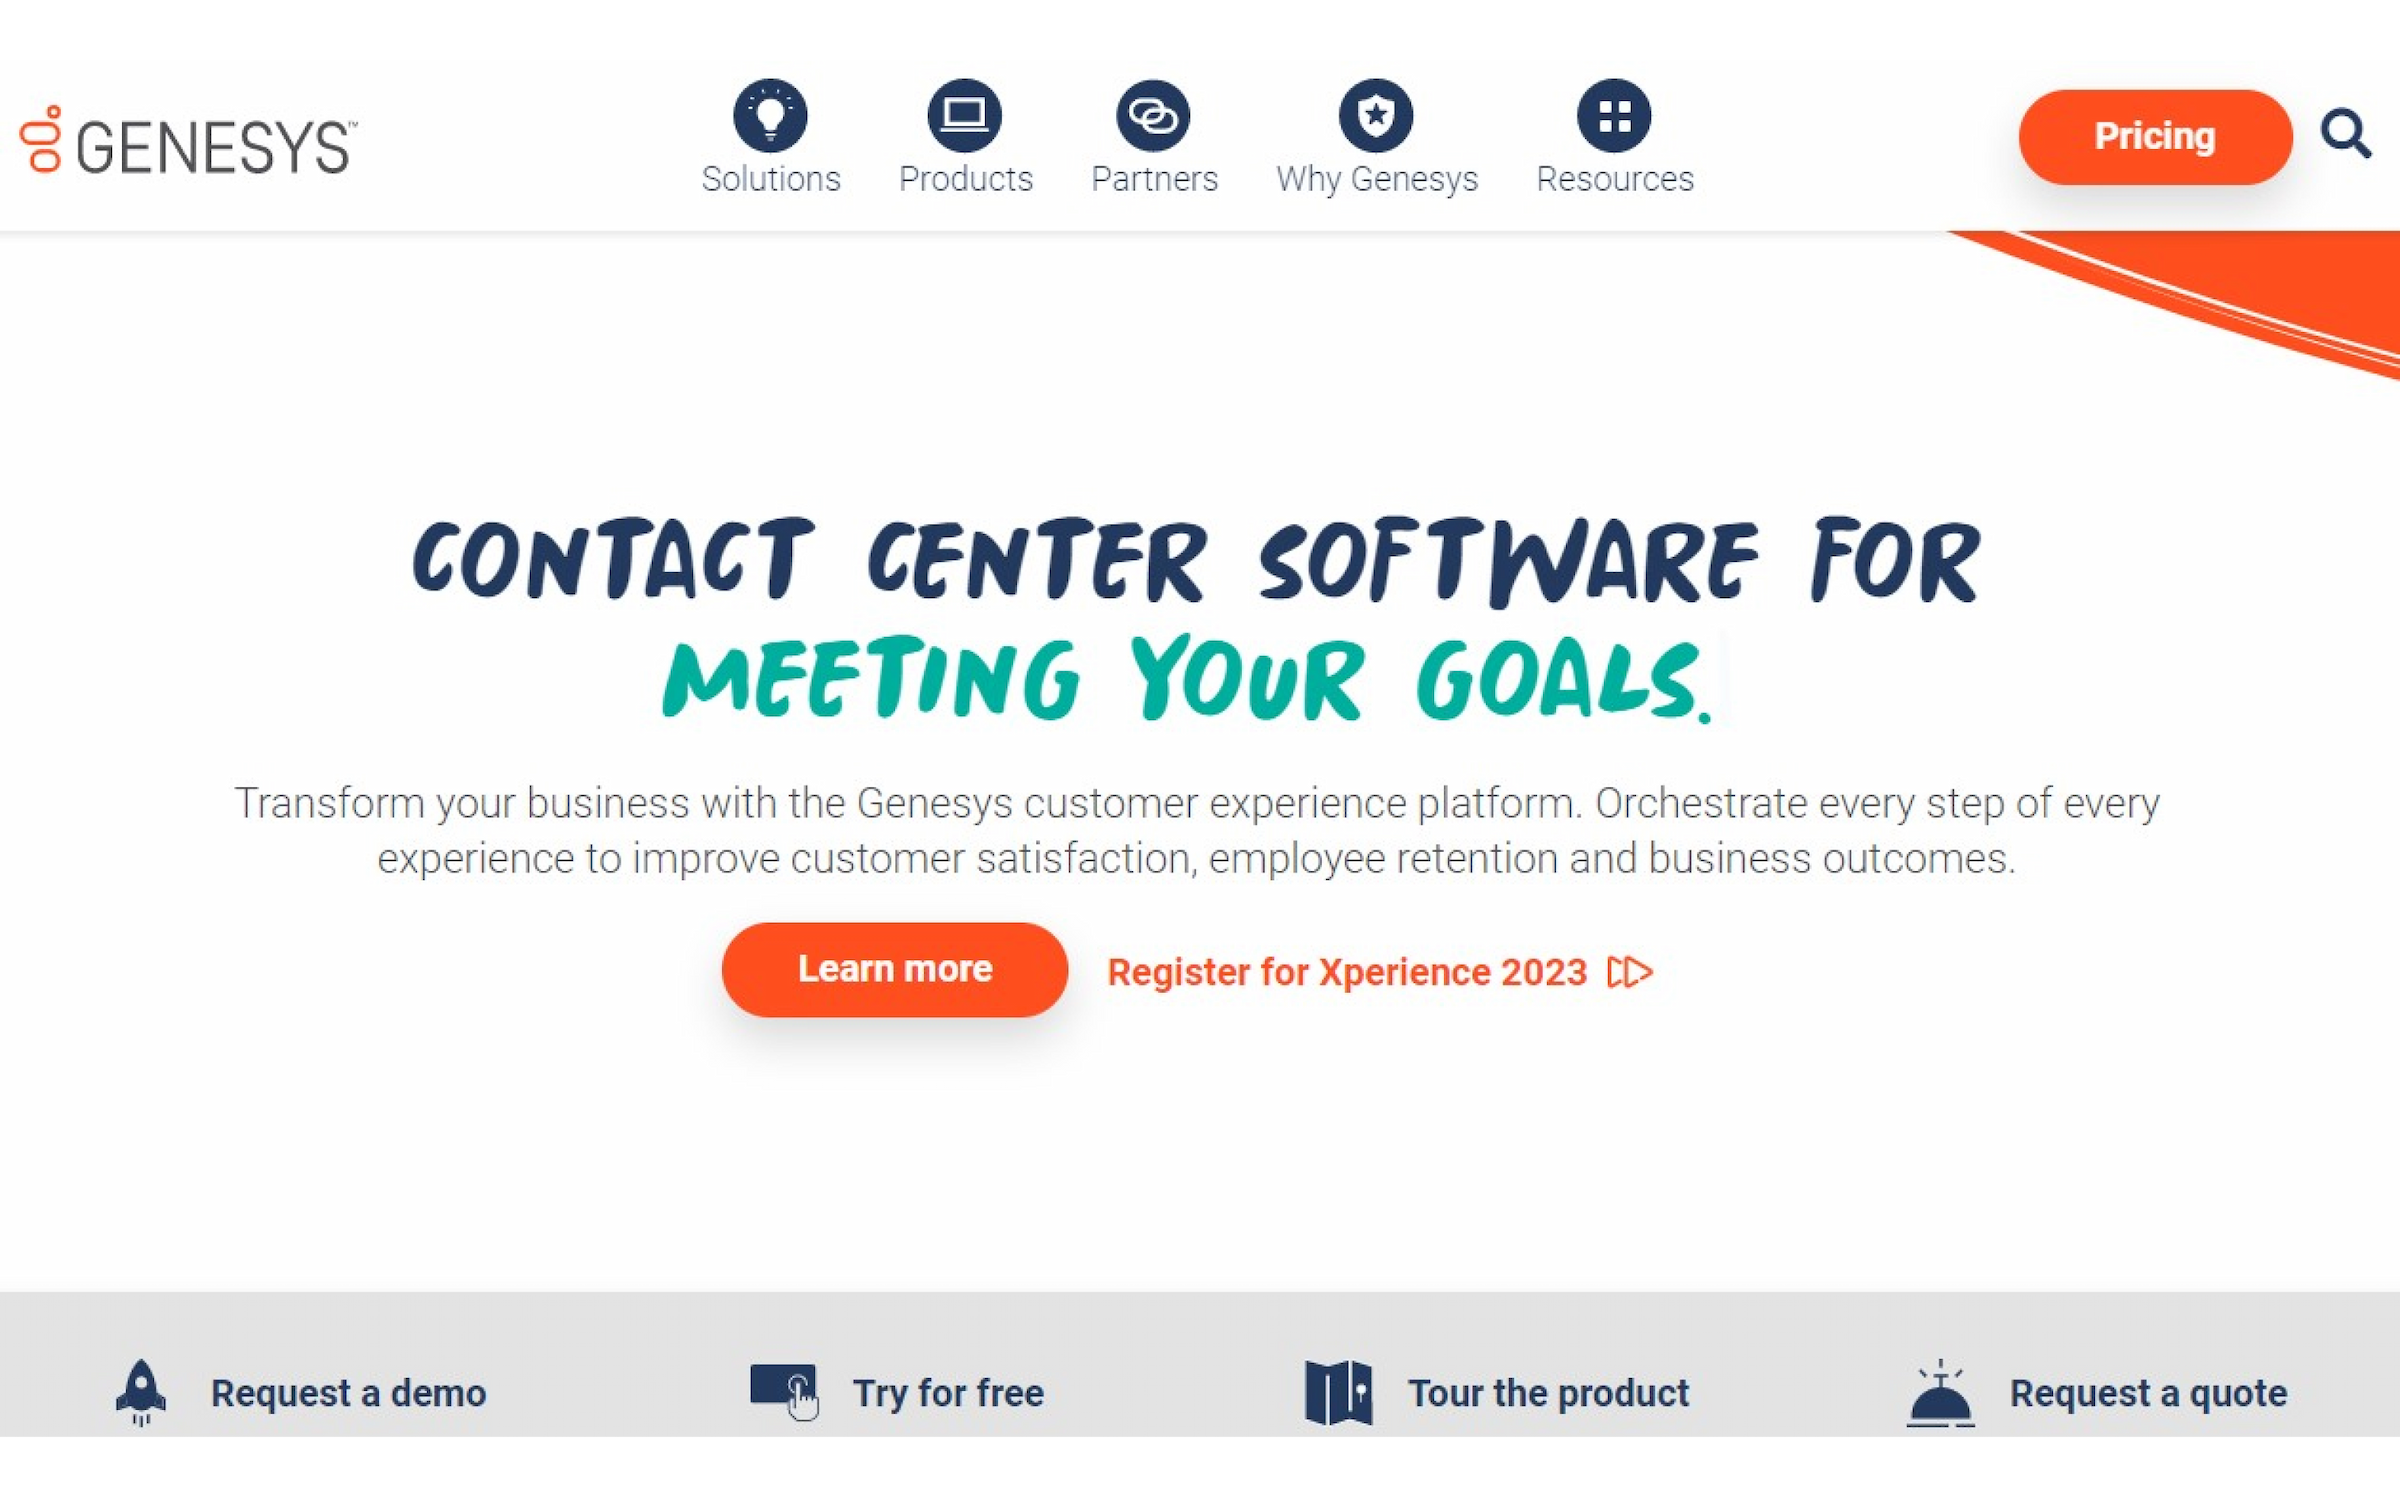 Genesys contact center software